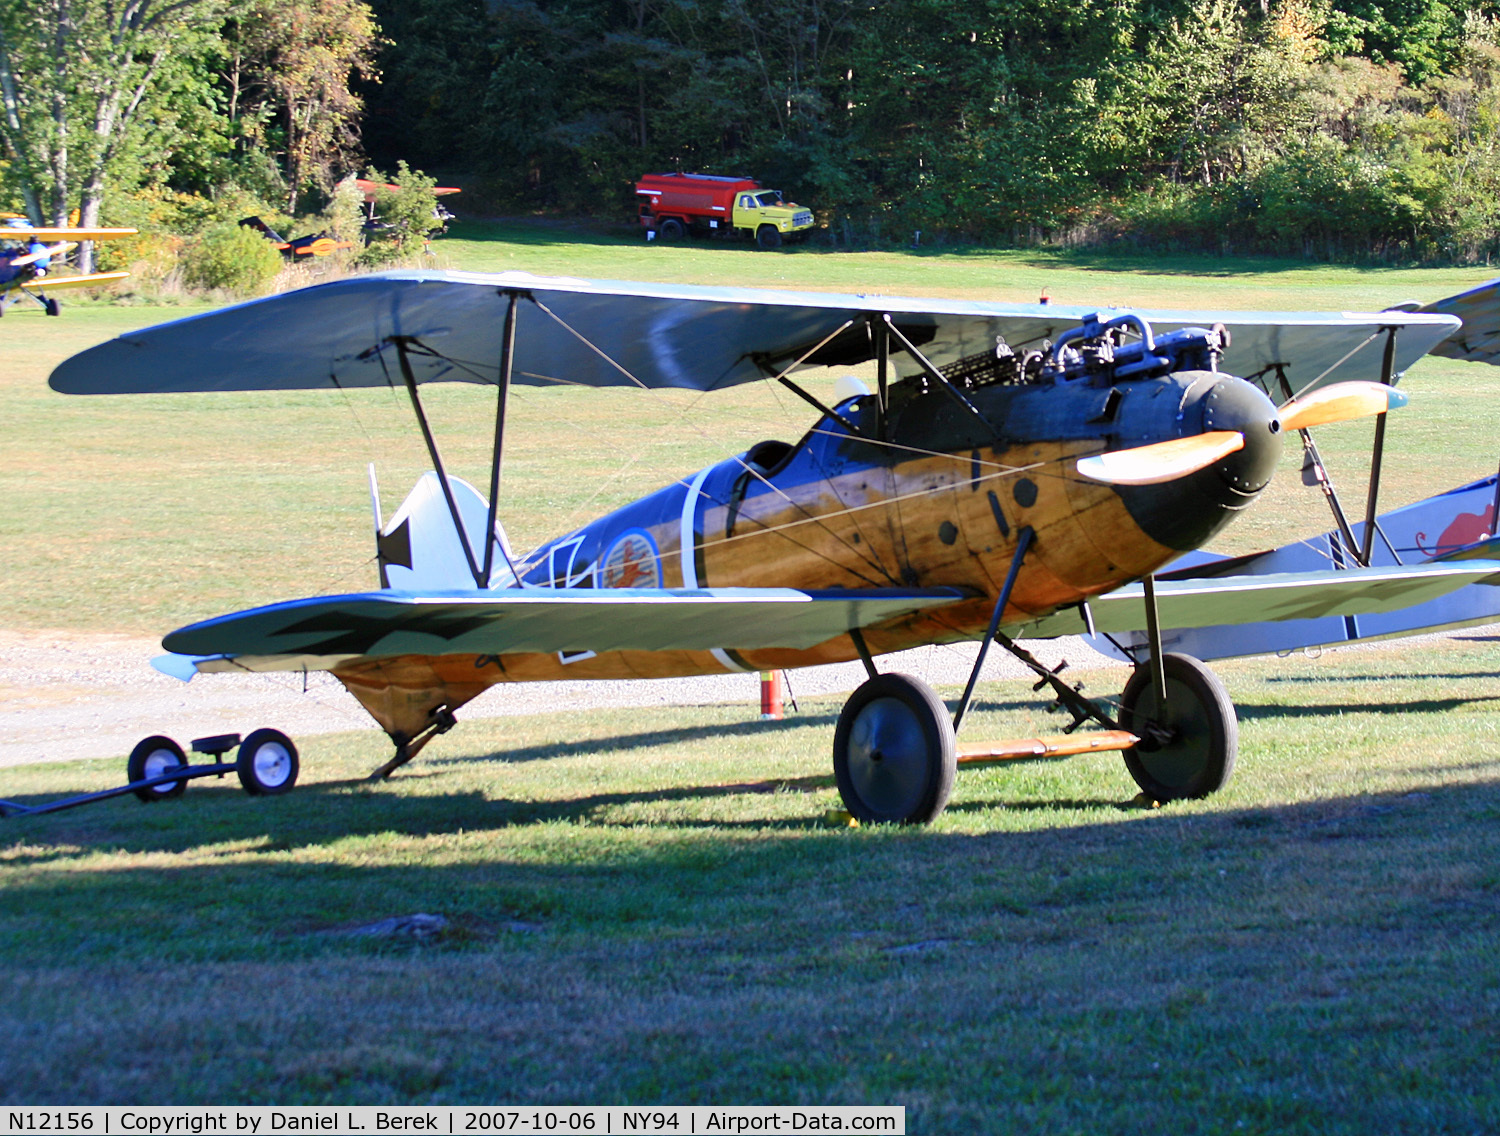 N12156, 1975 Albatros D-Va Replica C/N 17-D-7517, The Albatross is one of Cole Palen's more challenging creations, with its wooden fuselage.